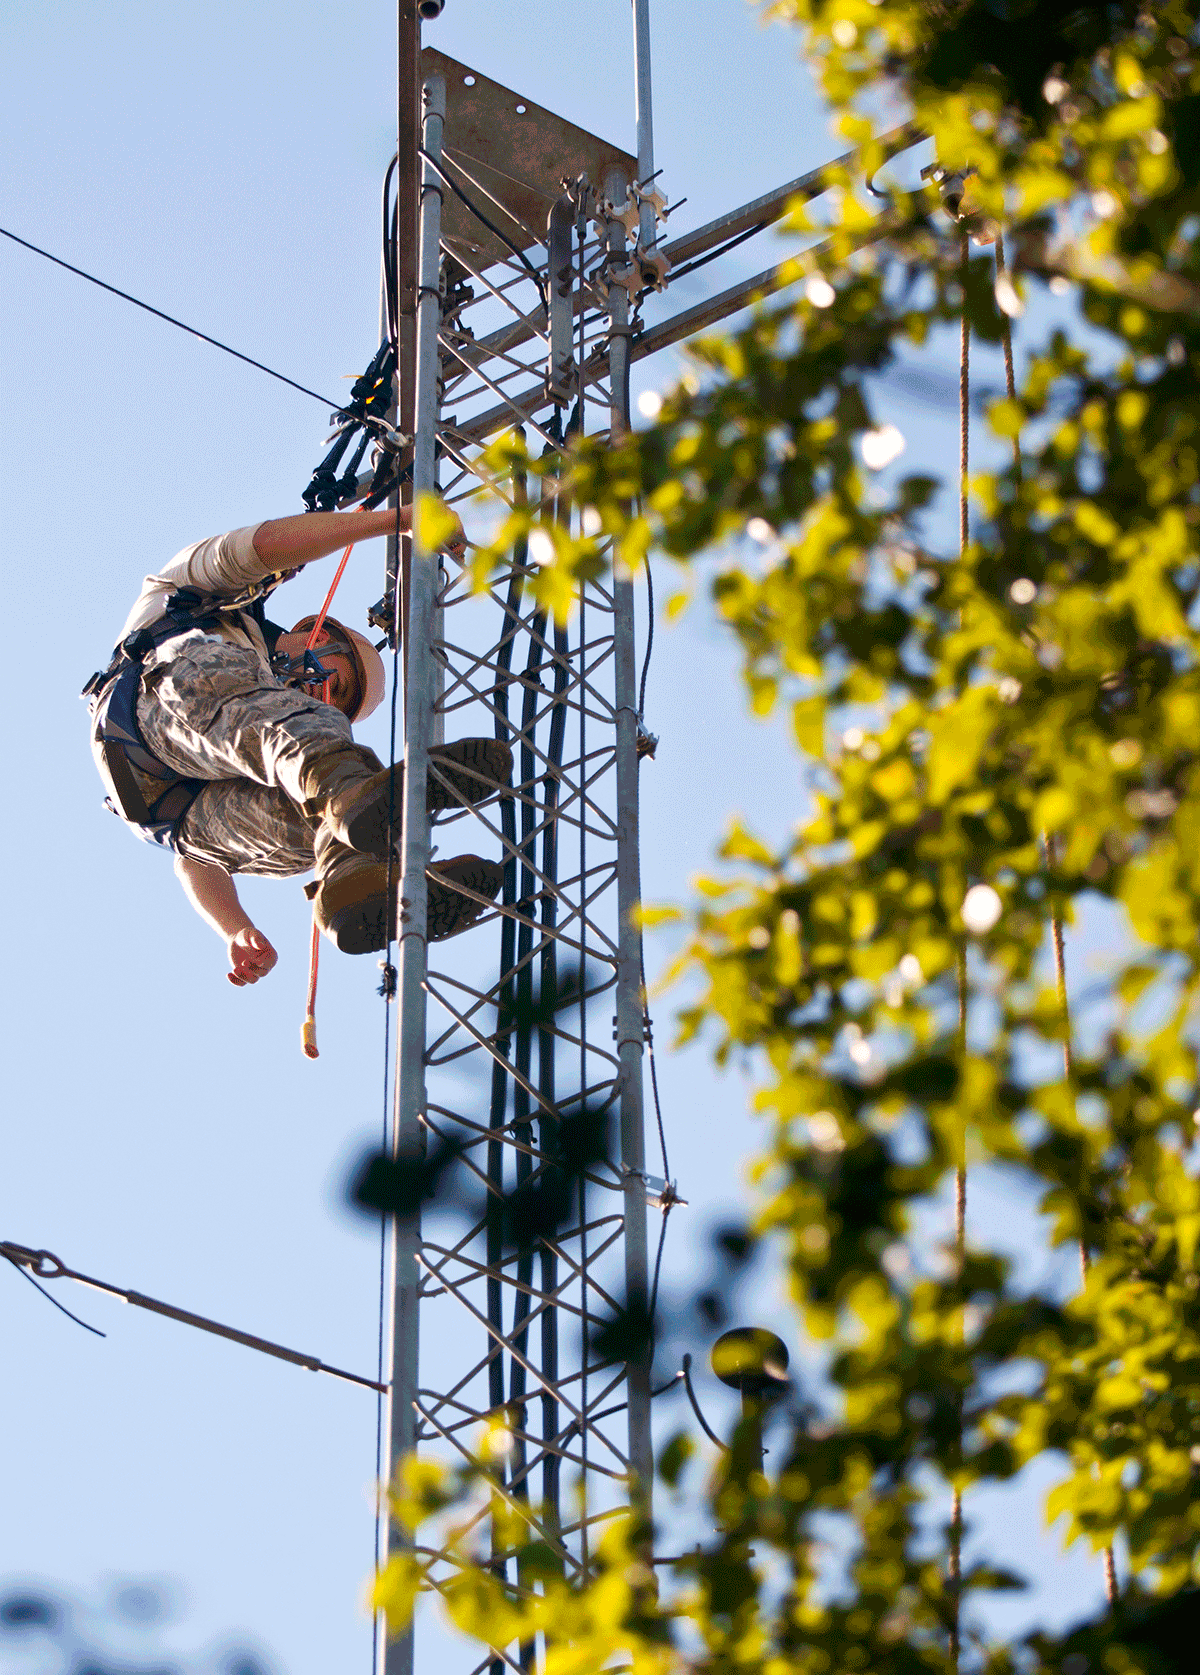 Staff Sgt. performs an antenna preventative maintenance inspection perched high on a tower. 